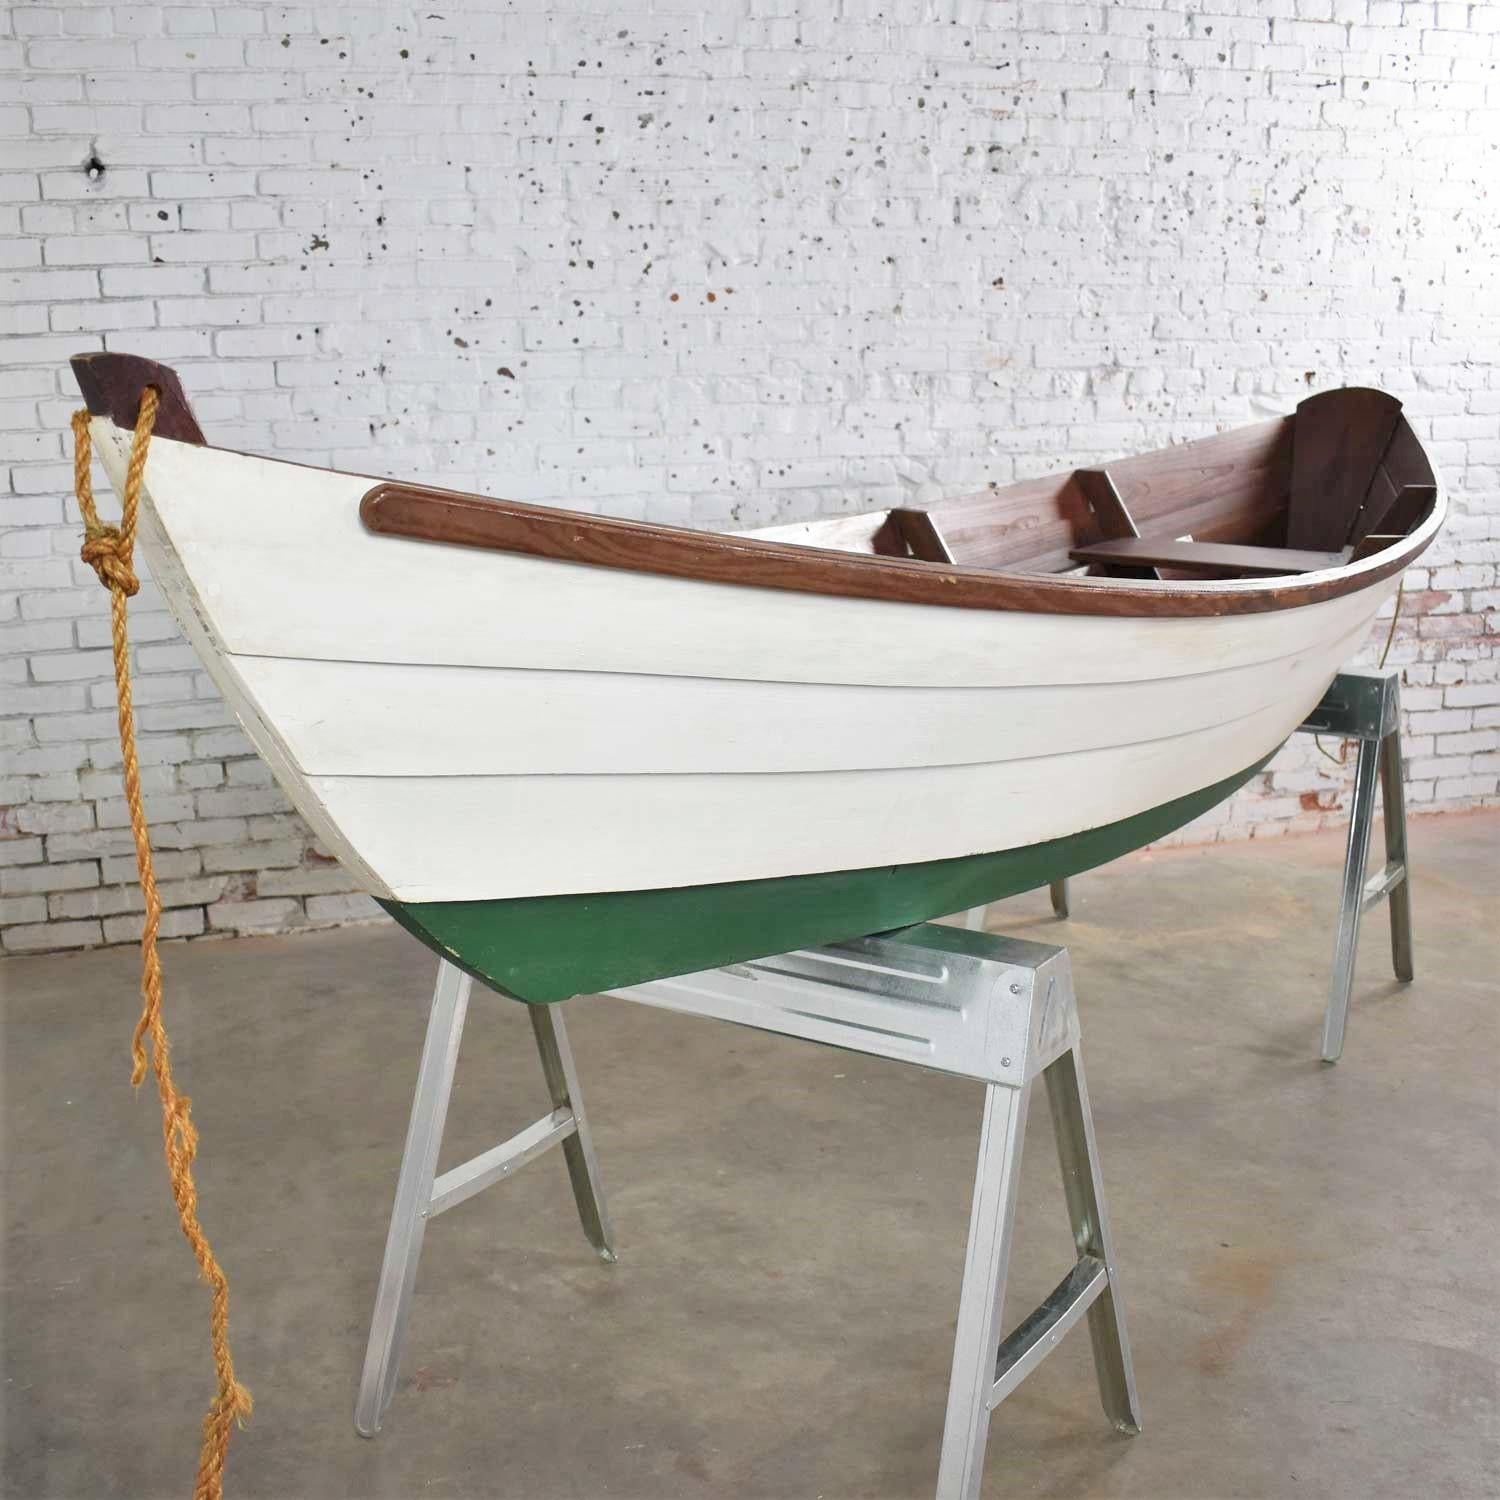 Oh, so fun vintage wooden rowboat to be used as maritime or nautical décor. It is in wonderful vintage condition with great natural age patina which includes peeling and chipped paint, cracks, and other wear. Will not float without modification.